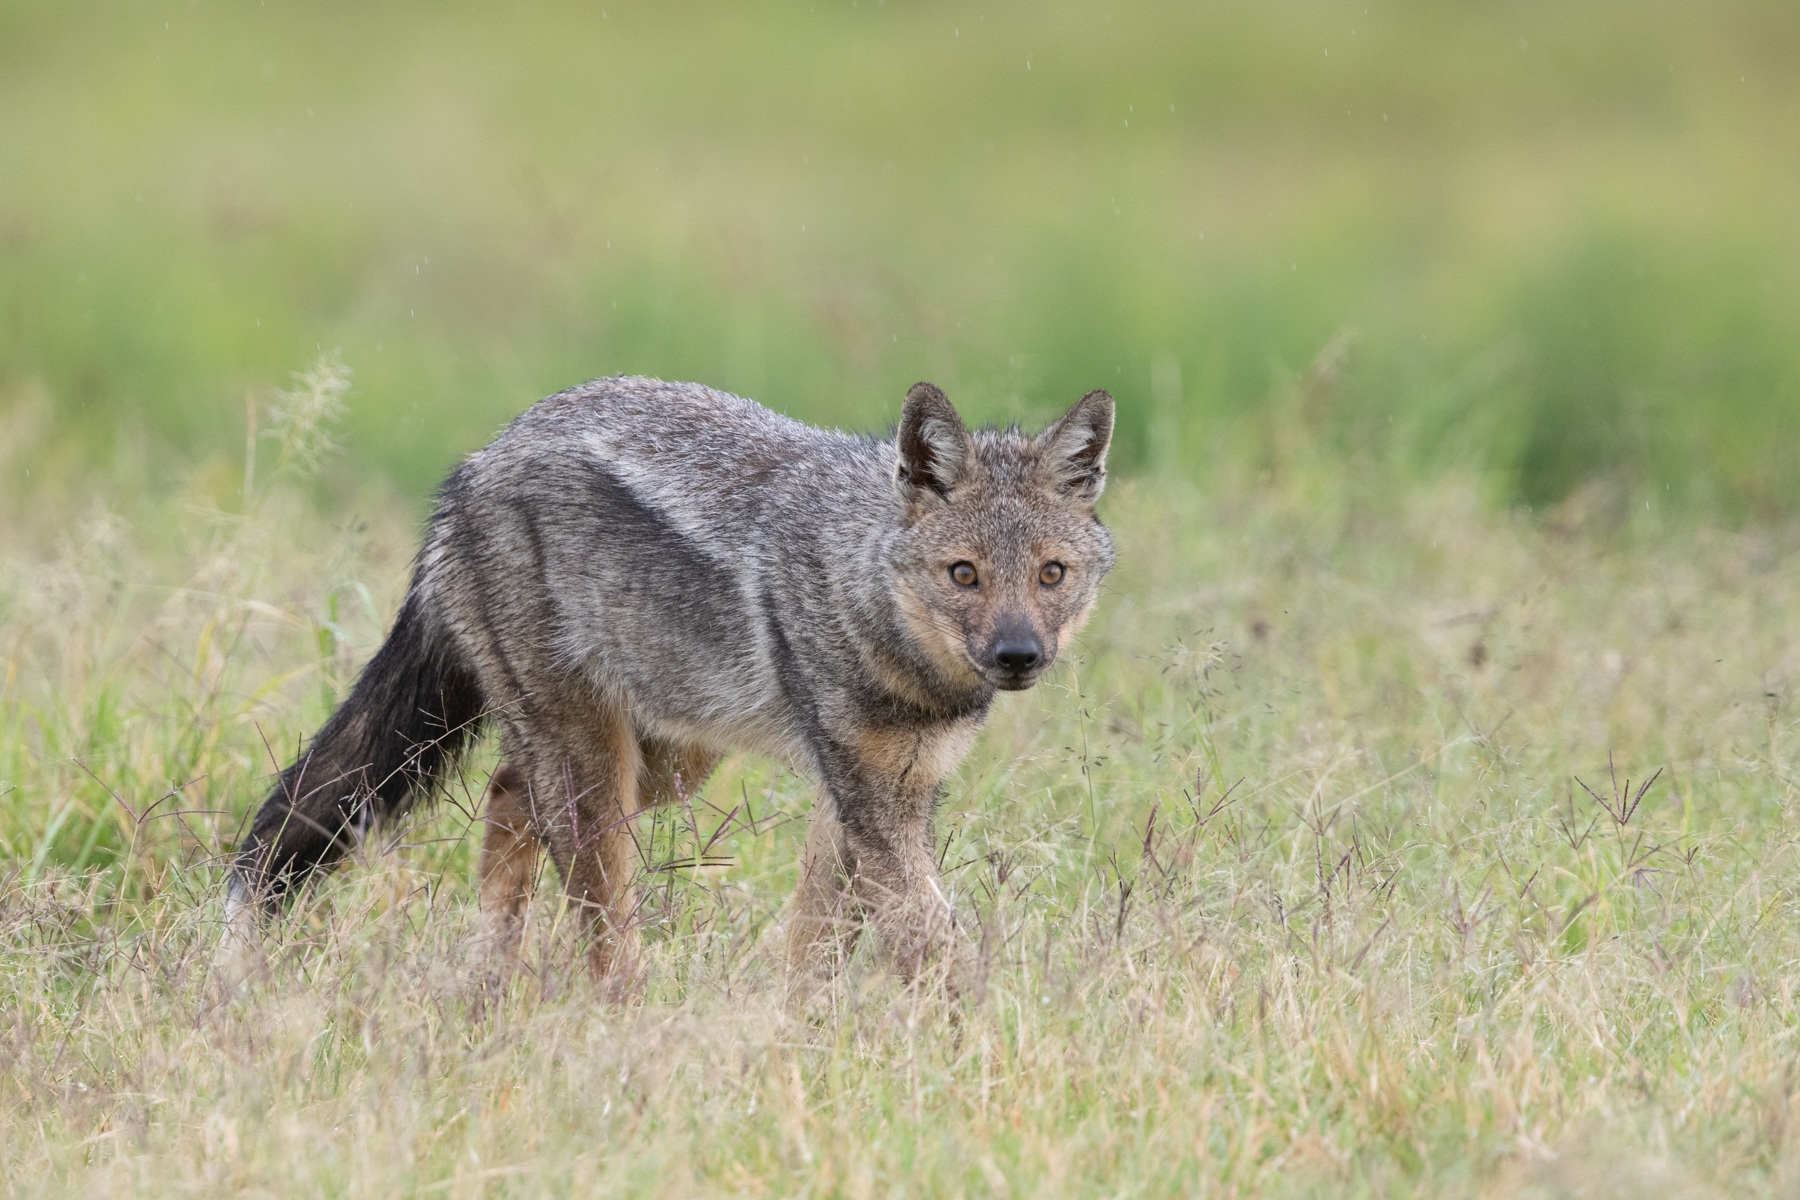 Portrait of a rather tame Side-striped Jackal at Lerai picnic site in Ngorongoro